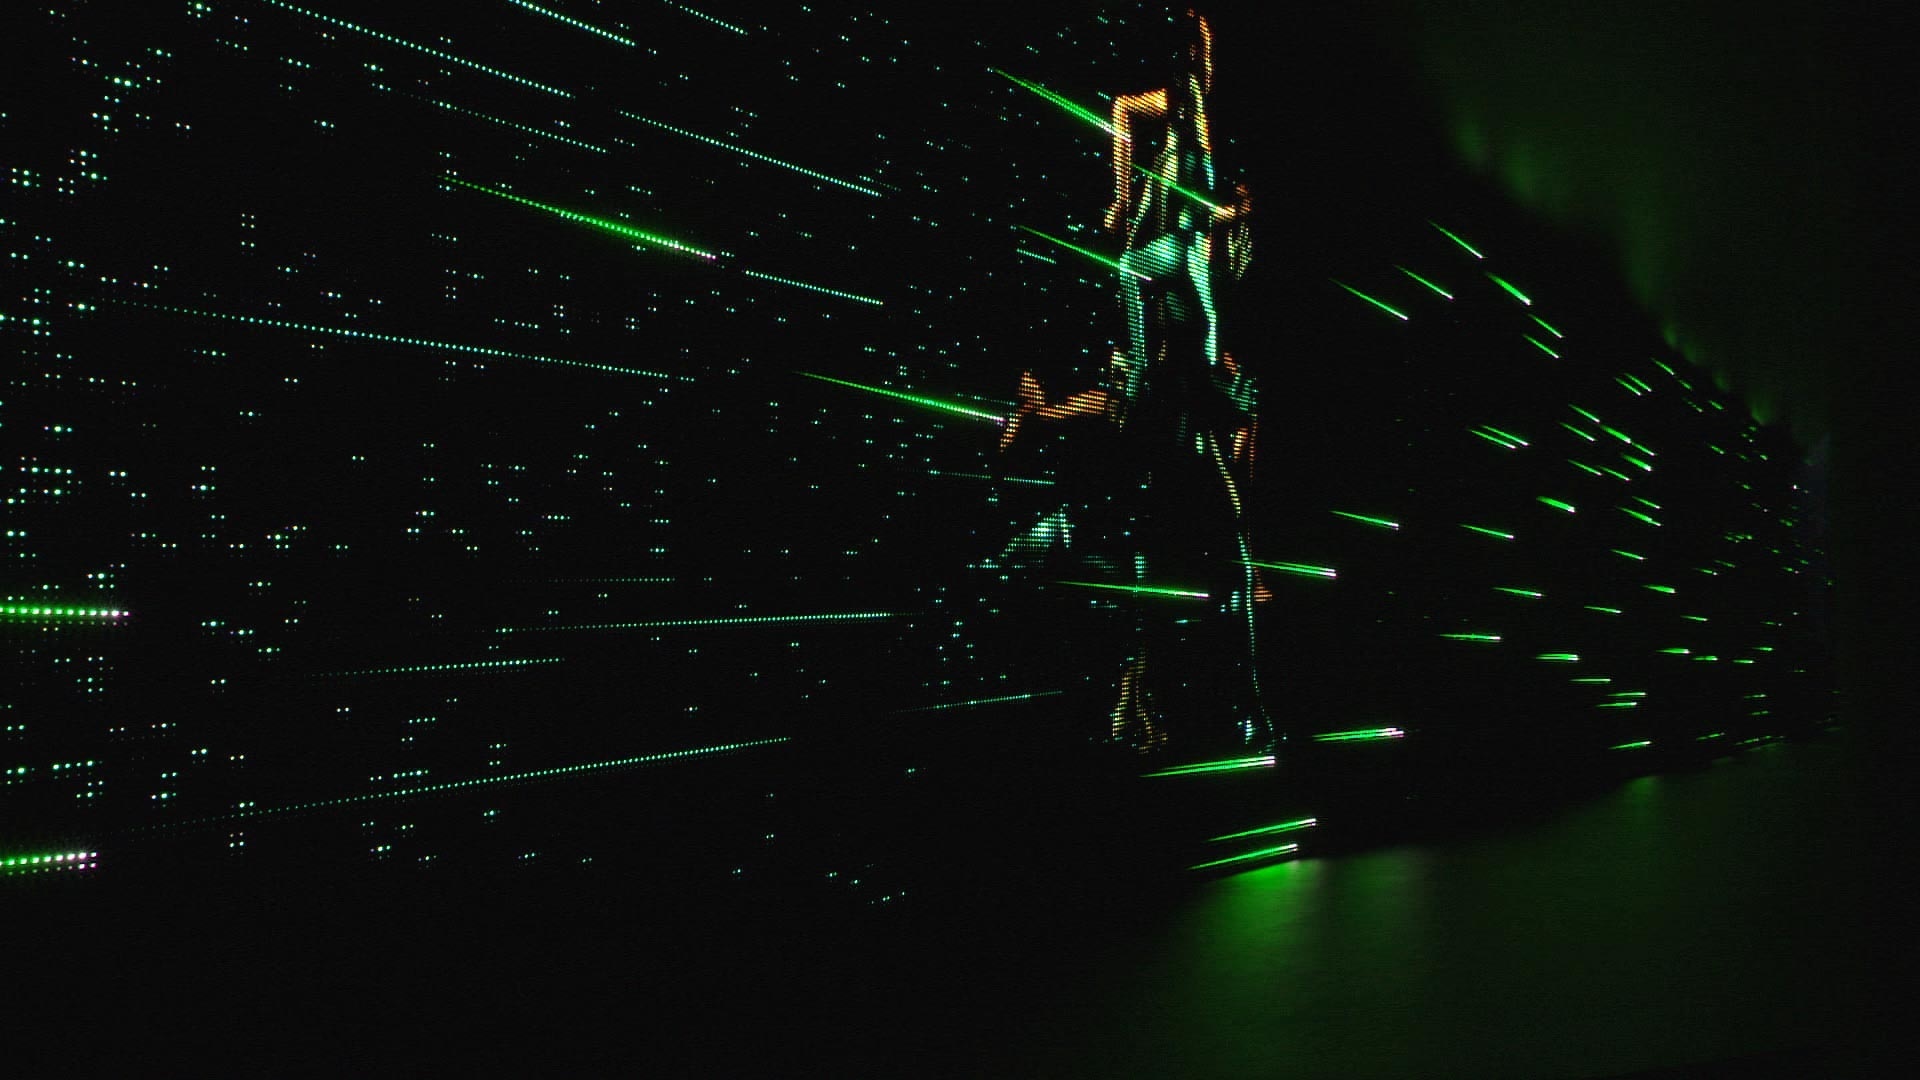 Screen with a larger than lifesize runner and green horizontal lines on a black background